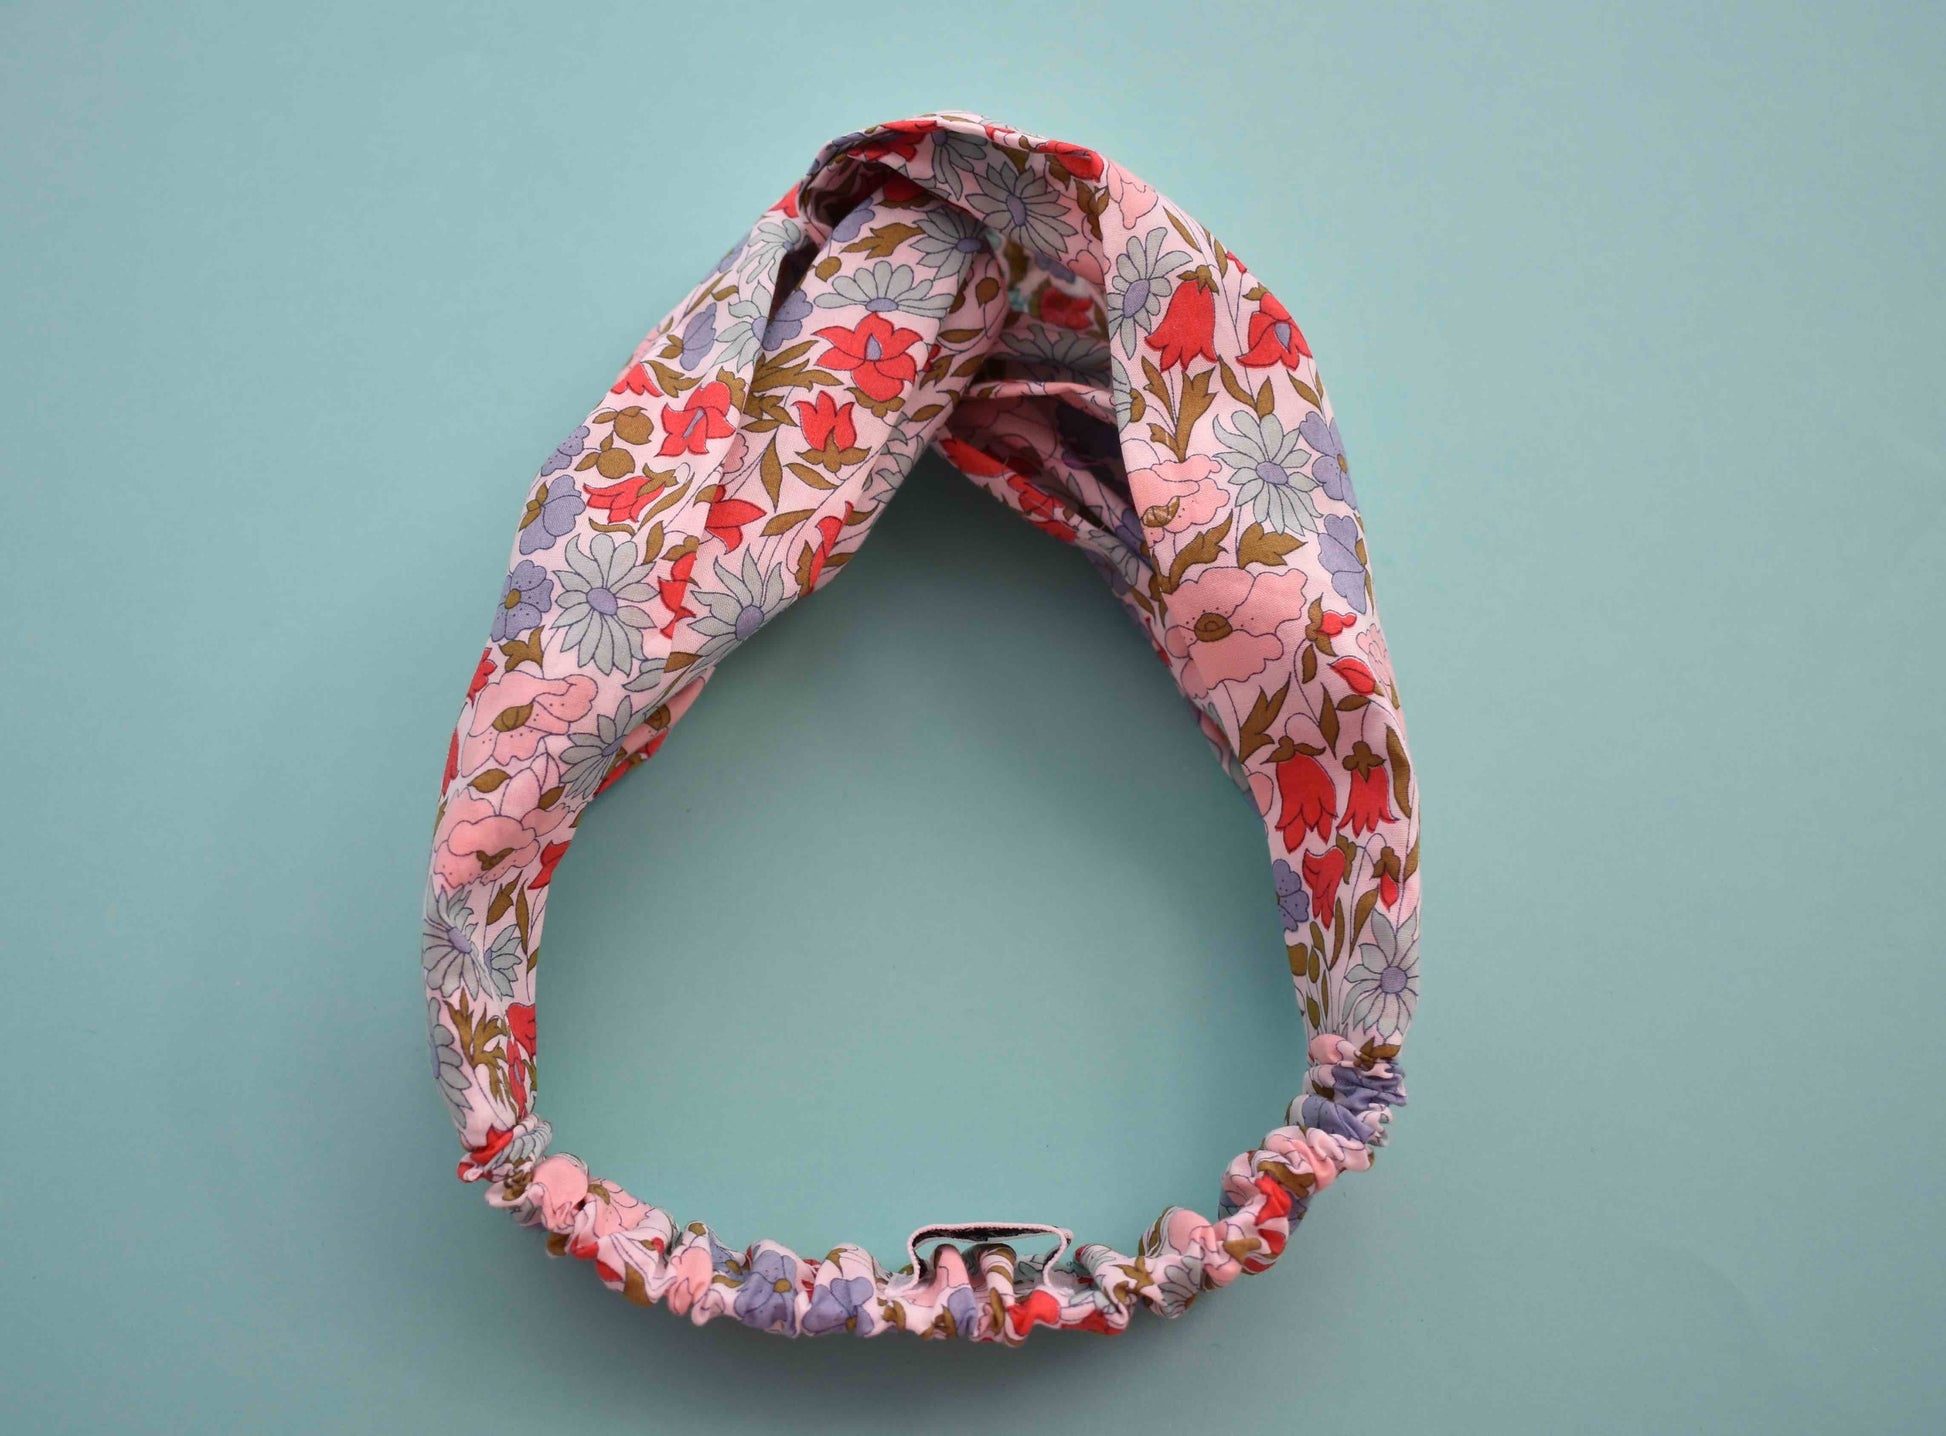 Tot Knot Twisted hairband - Poppy and Daisy Floral - Tot Knots of Brighton